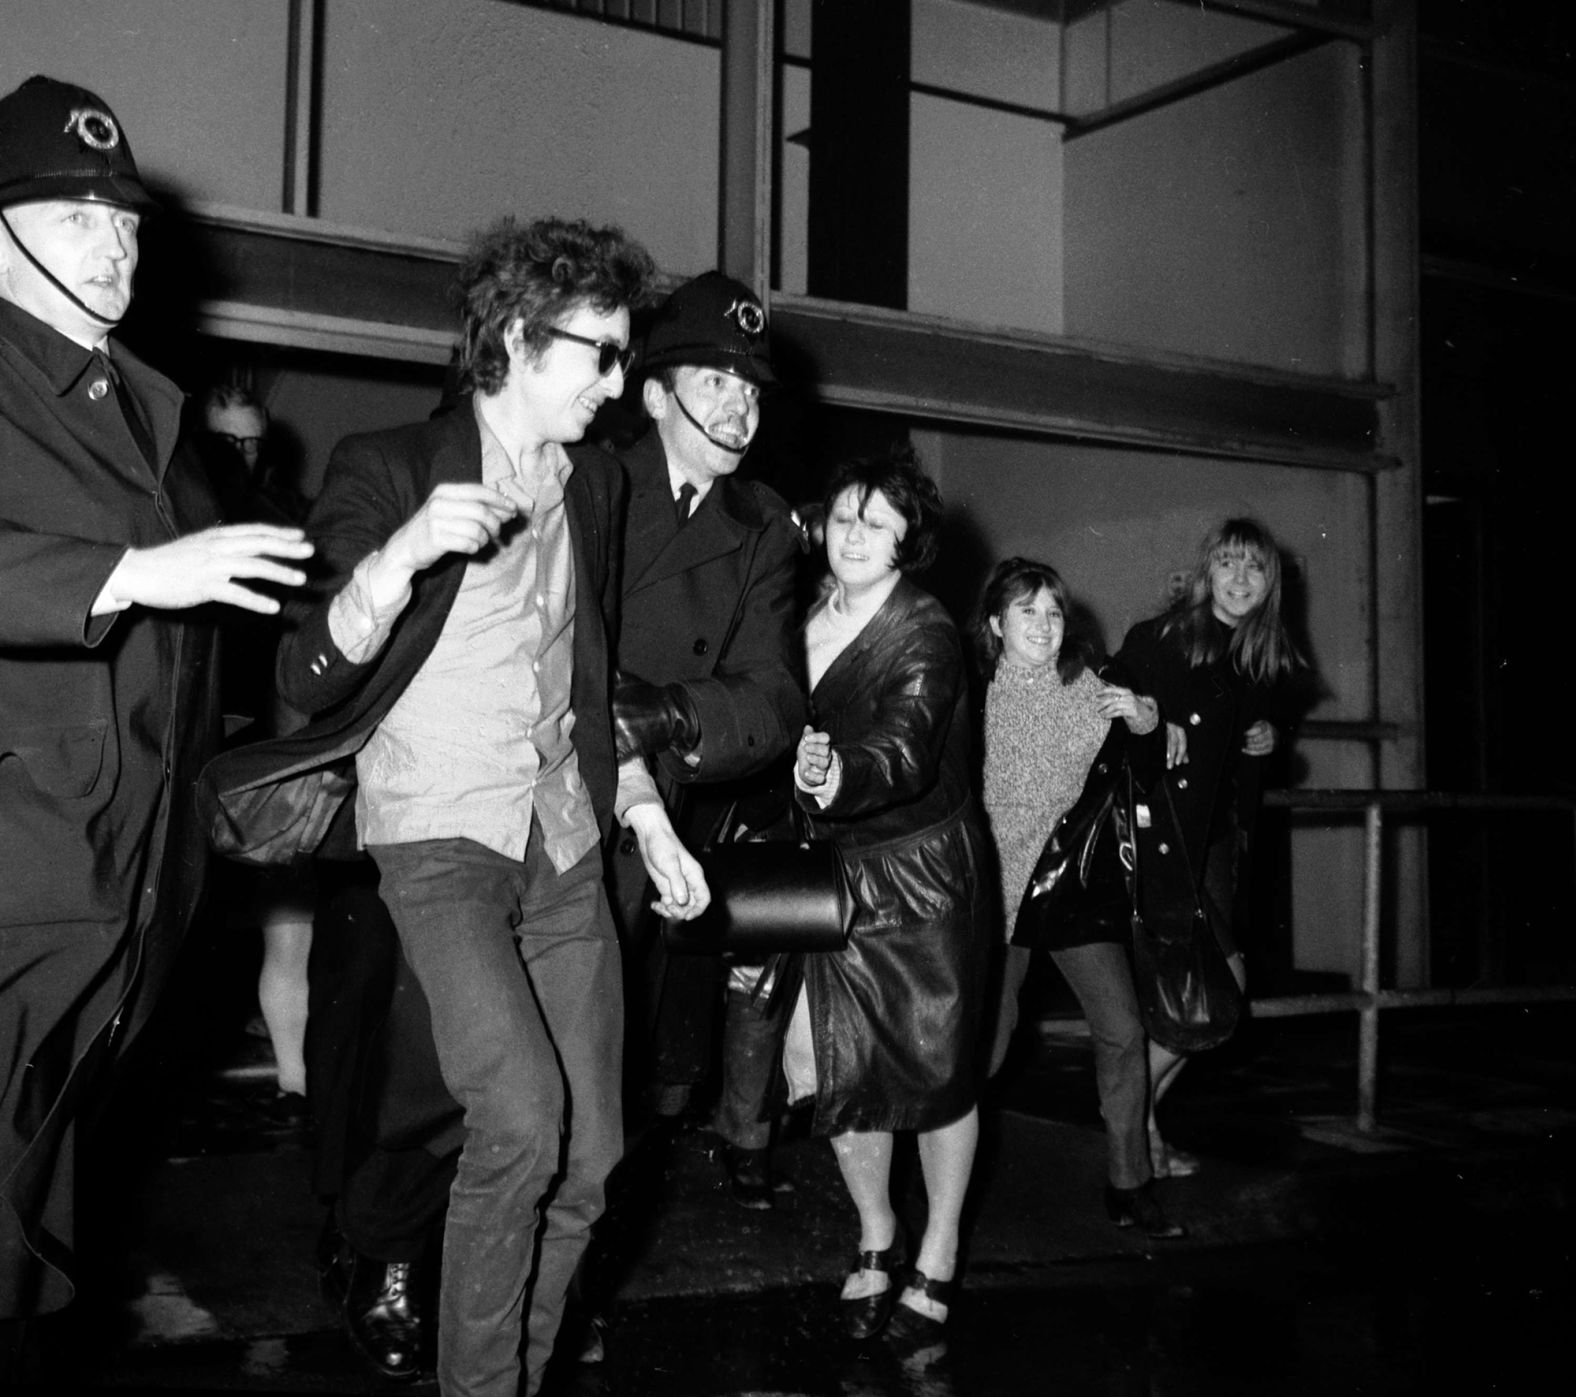 Dylan is escorted past fans as he arrives at a London airport in 1965.